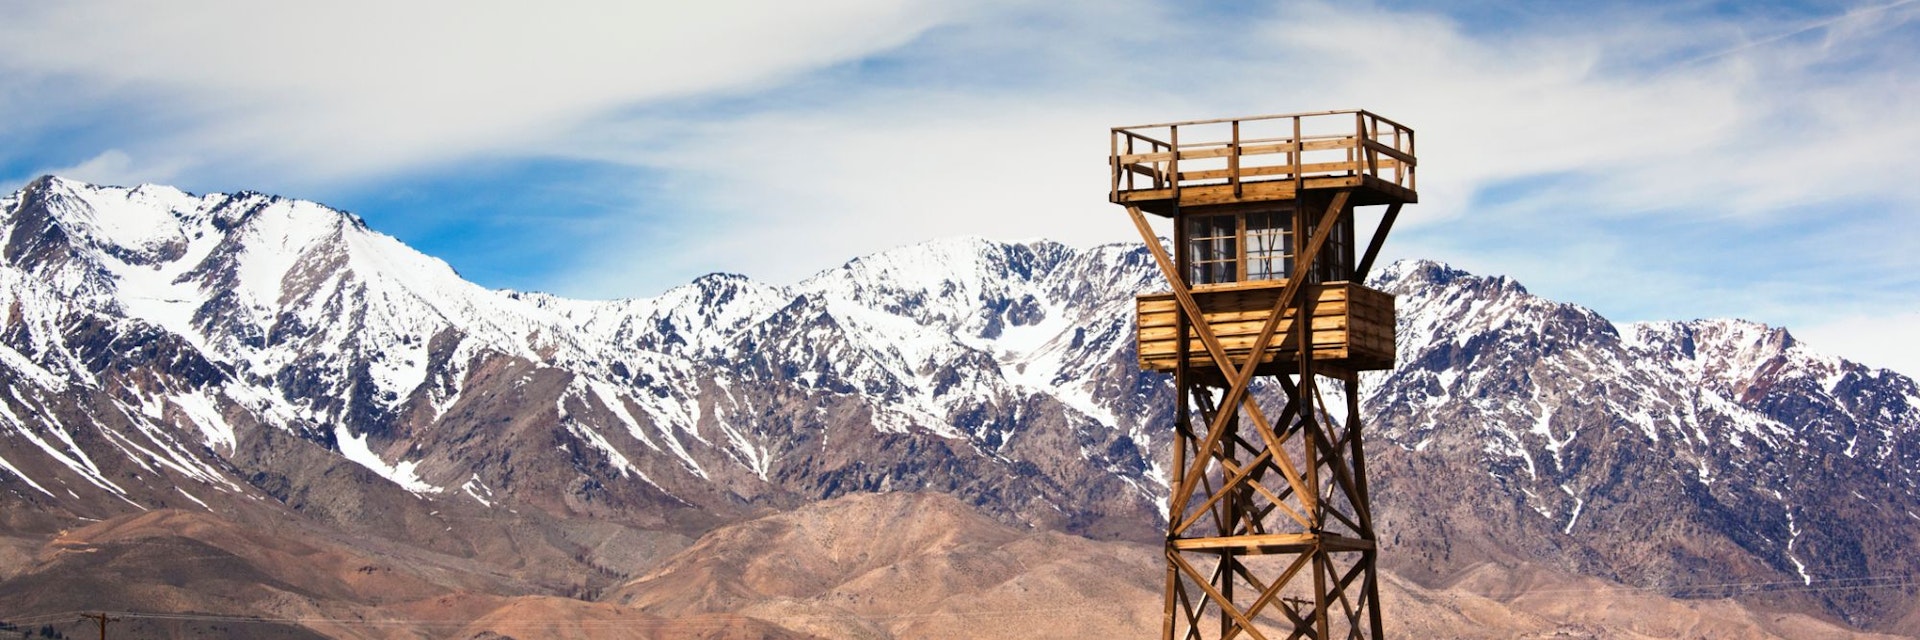 Manzanar National Historic Site, site of World War Two-era internment camp for Japanese-Americans, guard tower